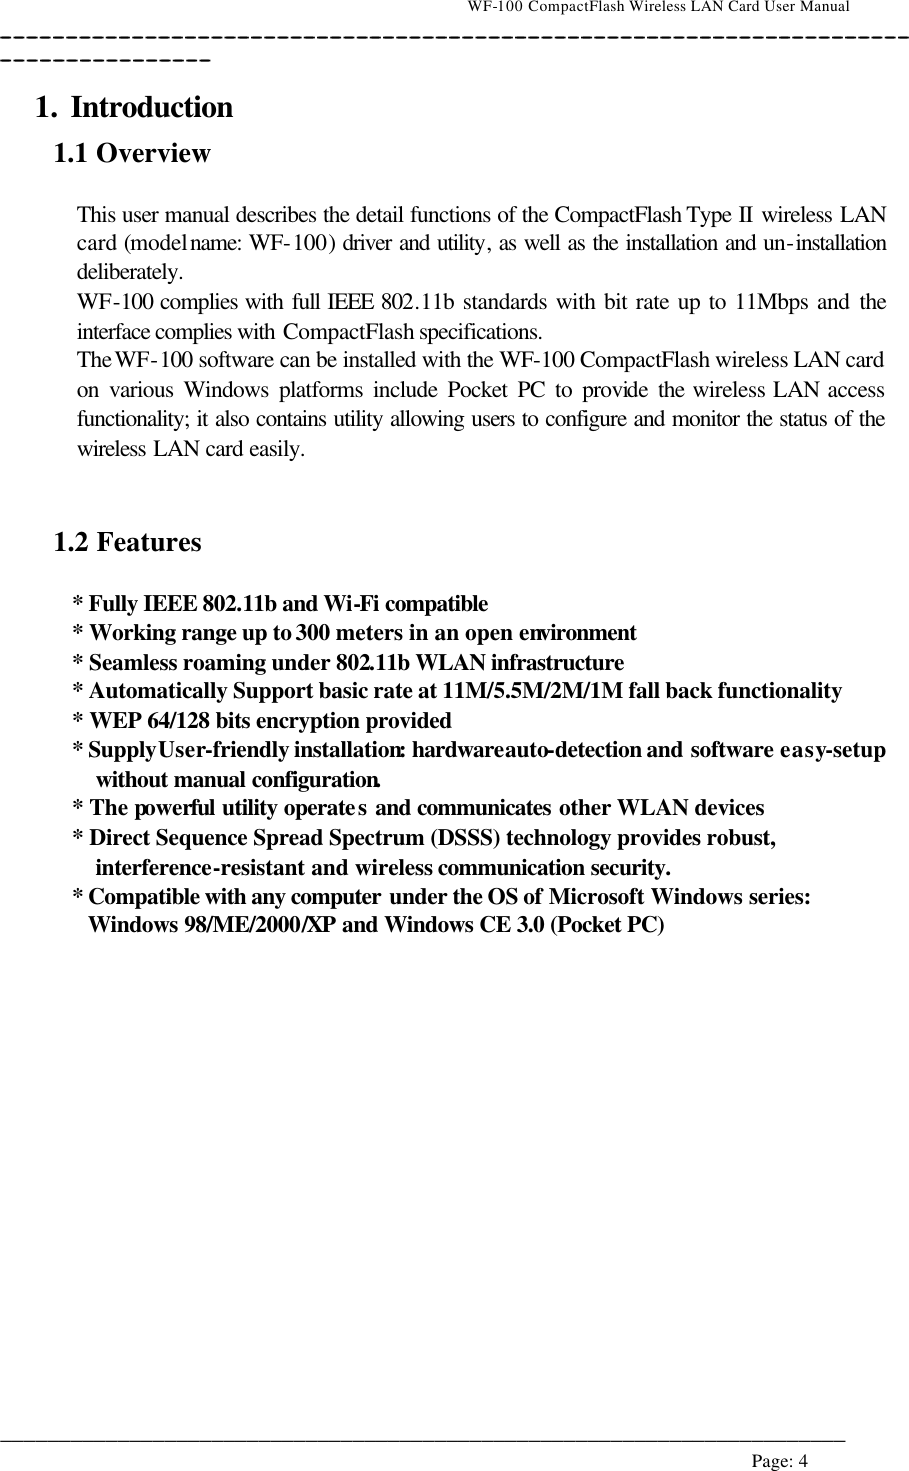                                    WF-100 CompactFlash Wireless LAN Card User Manual __________________________________________________________________________________________________________________________________________________________________________  ________________________________________________________________________  Page: 4   1. Introduction 1.1 Overview  This user manual describes the detail functions of the CompactFlash Type II wireless LAN card (model name: WF-100) driver and utility, as well as the installation and un-installation deliberately. WF-100 complies with full IEEE 802.11b standards with bit rate up to 11Mbps and the interface complies with CompactFlash specifications. The WF-100 software can be installed with the WF-100 CompactFlash wireless LAN card on various Windows platforms include Pocket PC to provide  the wireless LAN access functionality; it also contains utility allowing users to configure and monitor the status of the wireless LAN card easily.   1.2 Features  * Fully IEEE 802.11b and Wi-Fi compatible * Working range up to 300 meters in an open environment * Seamless roaming under 802.11b WLAN infrastructure * Automatically Support basic rate at 11M/5.5M/2M/1M fall back functionality * WEP 64/128 bits encryption provided * Supply User-friendly installation: hardware auto-detection and software easy-setup without manual configuration. * The powerful utility operates and communicates other WLAN devices * Direct Sequence Spread Spectrum (DSSS) technology provides robust, interference-resistant and wireless communication security. * Compatible with any computer under the OS of Microsoft Windows series: Windows 98/ME/2000/XP and Windows CE 3.0 (Pocket PC)  